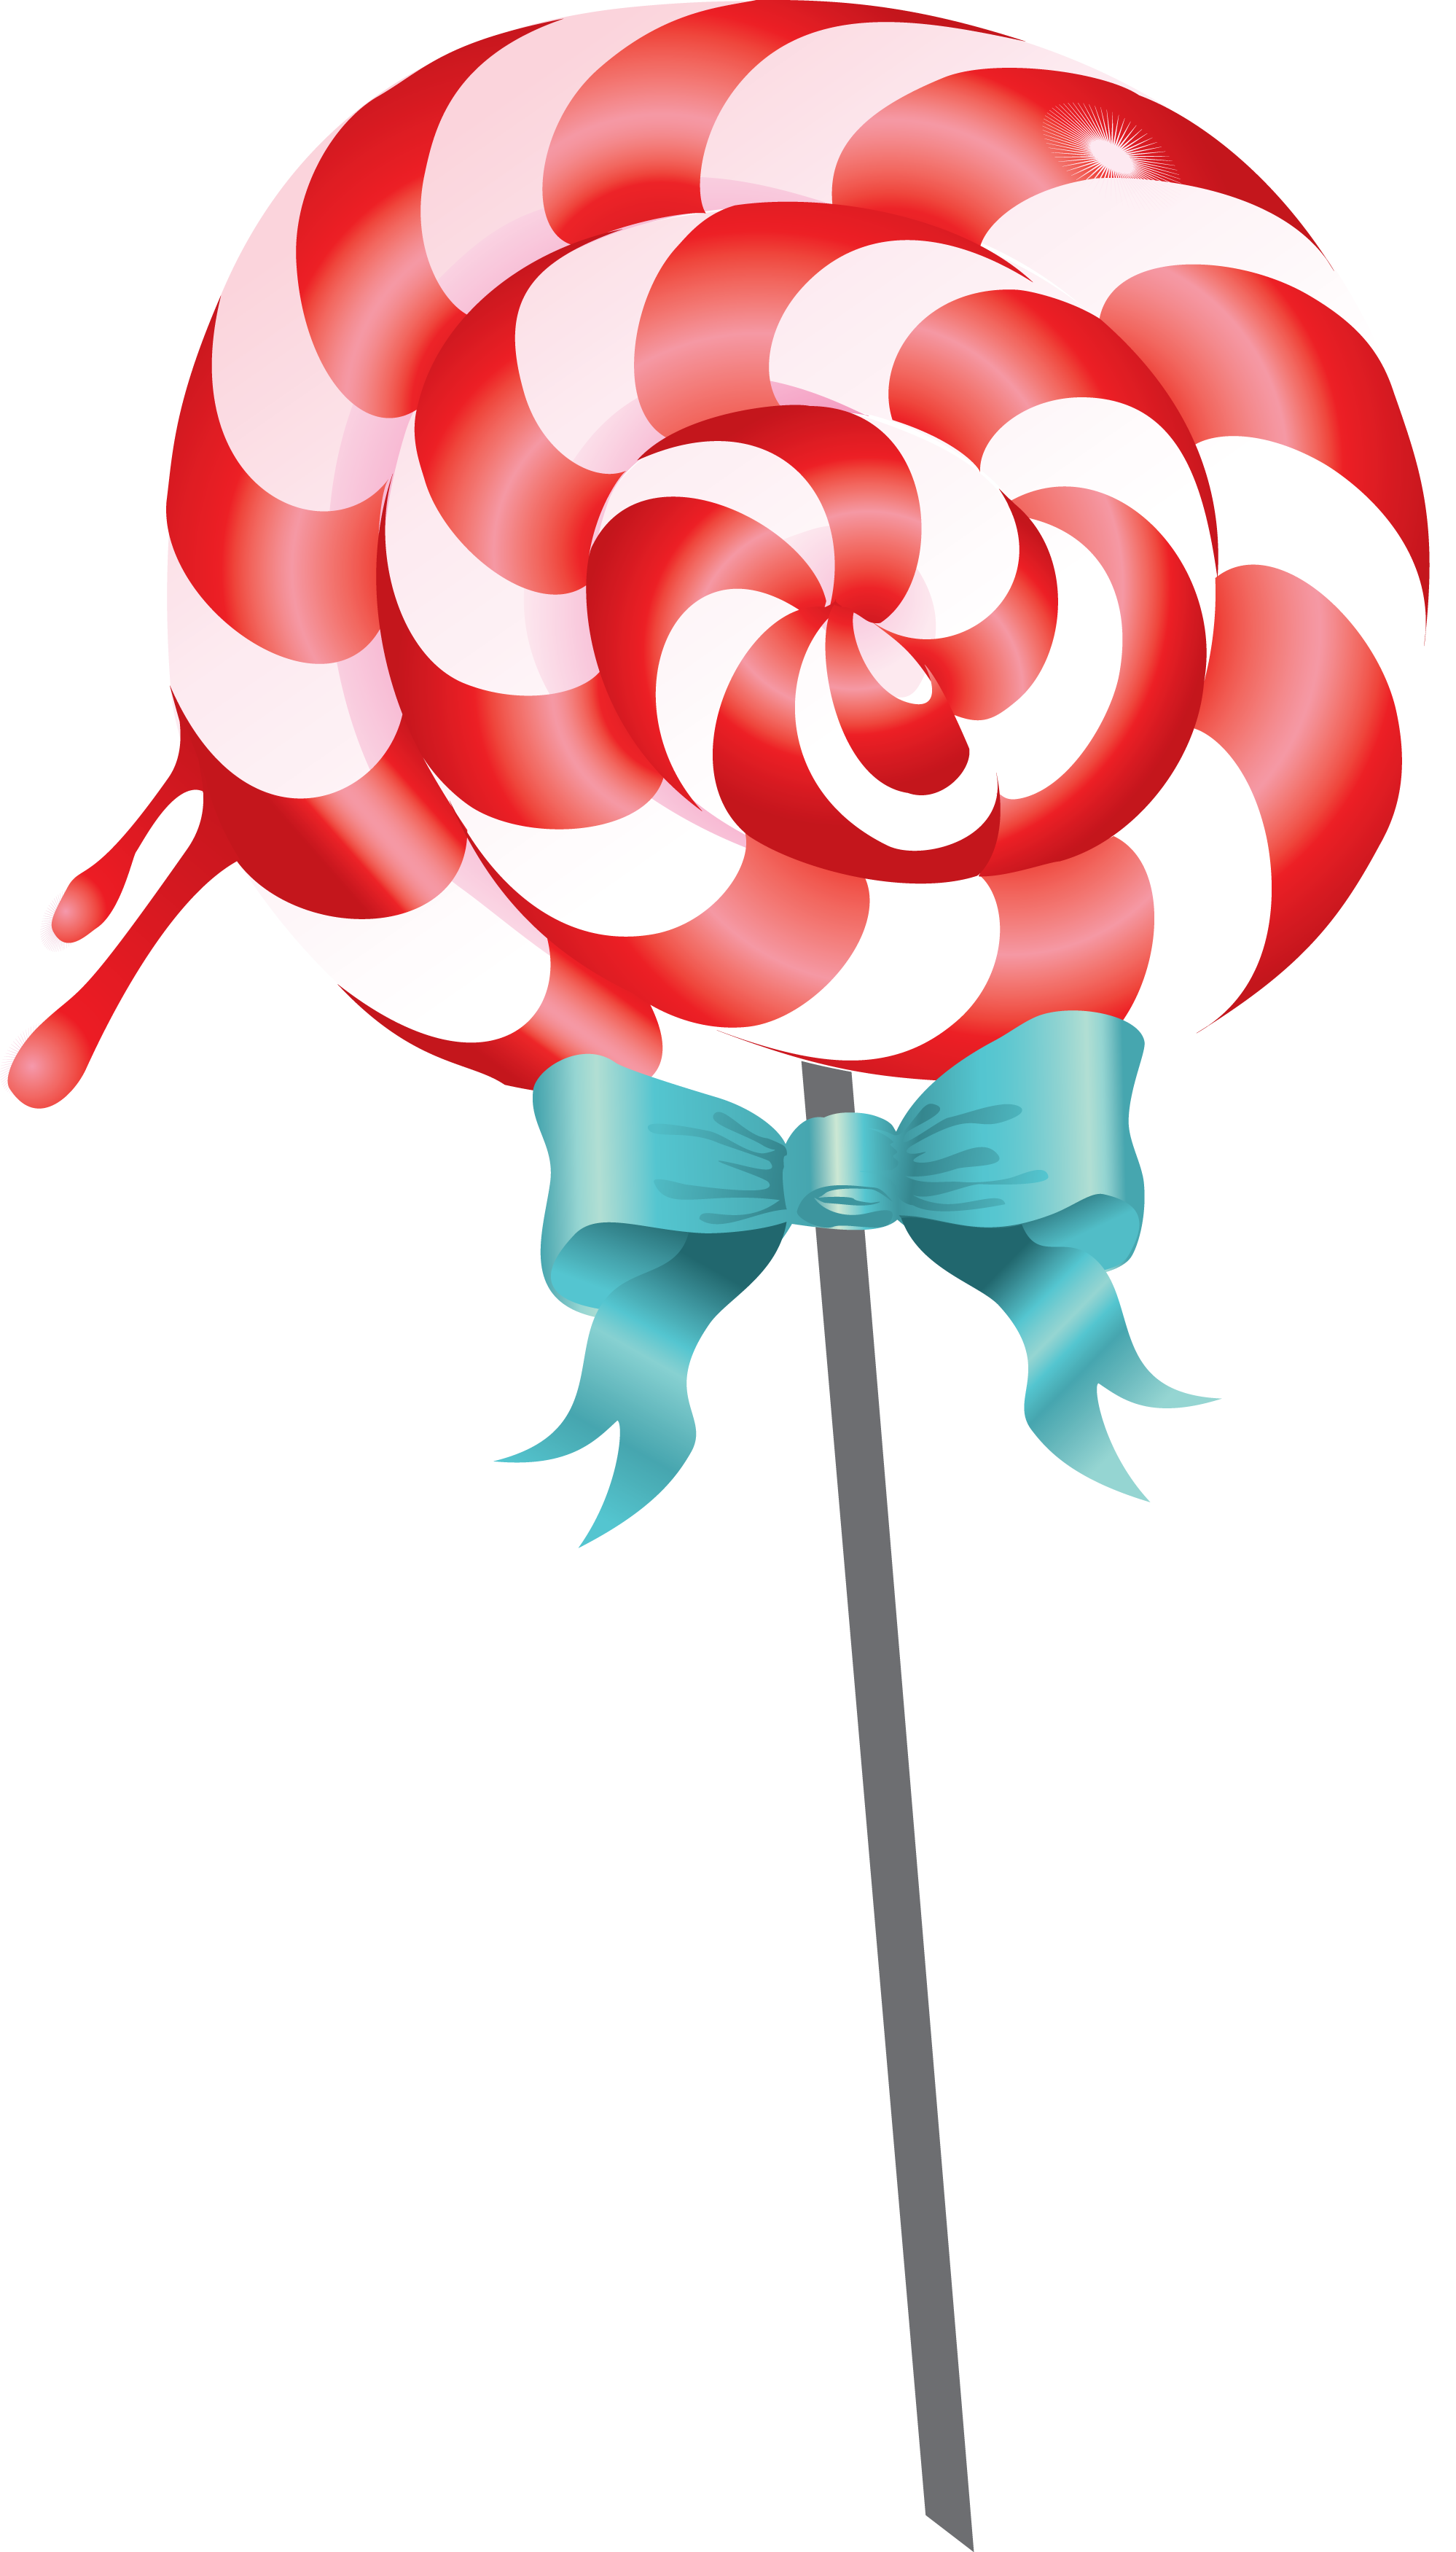 Red and White Lollipop PNG Image